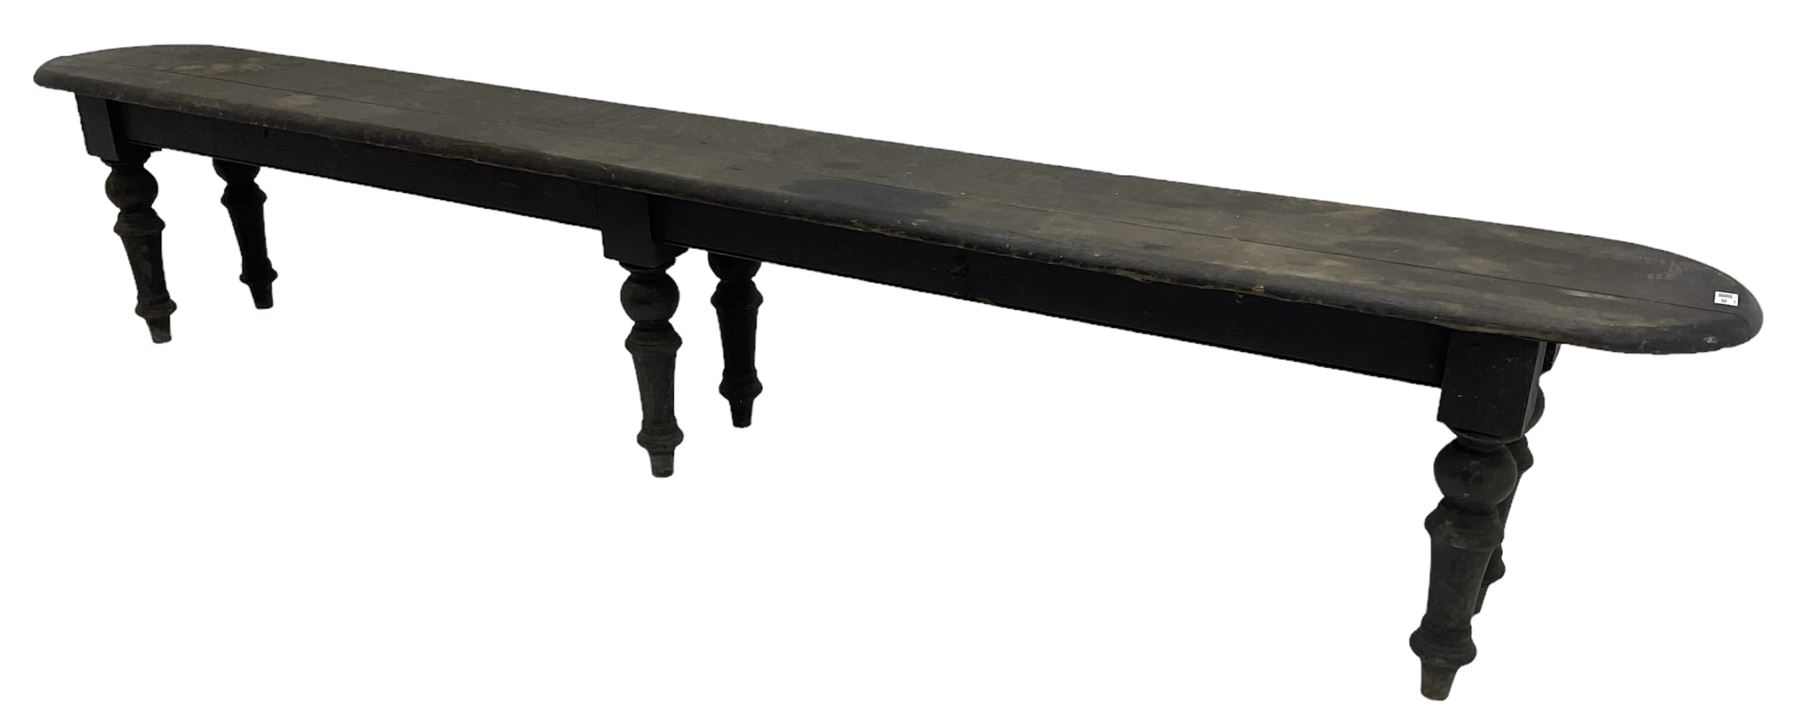 Large 19th century stained oak 9' hall bench - Image 8 of 8